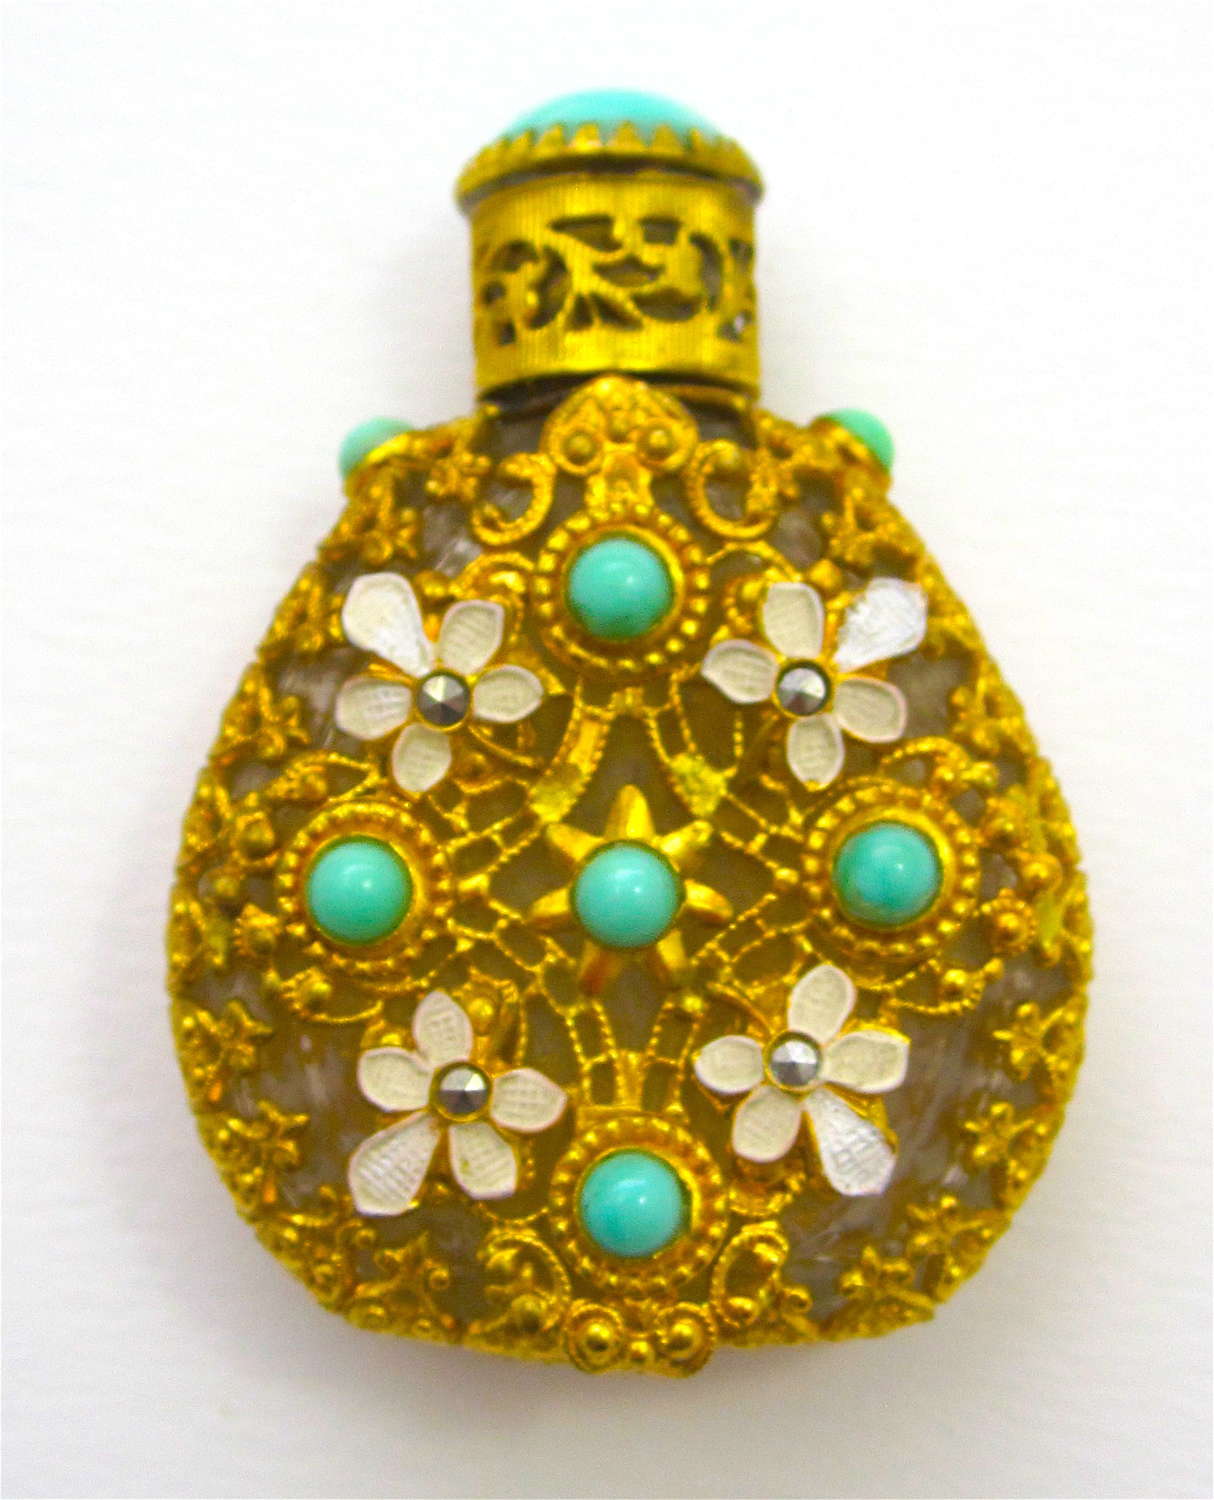 Vintage Czech Perfume Bottle with Turquoise Jewels